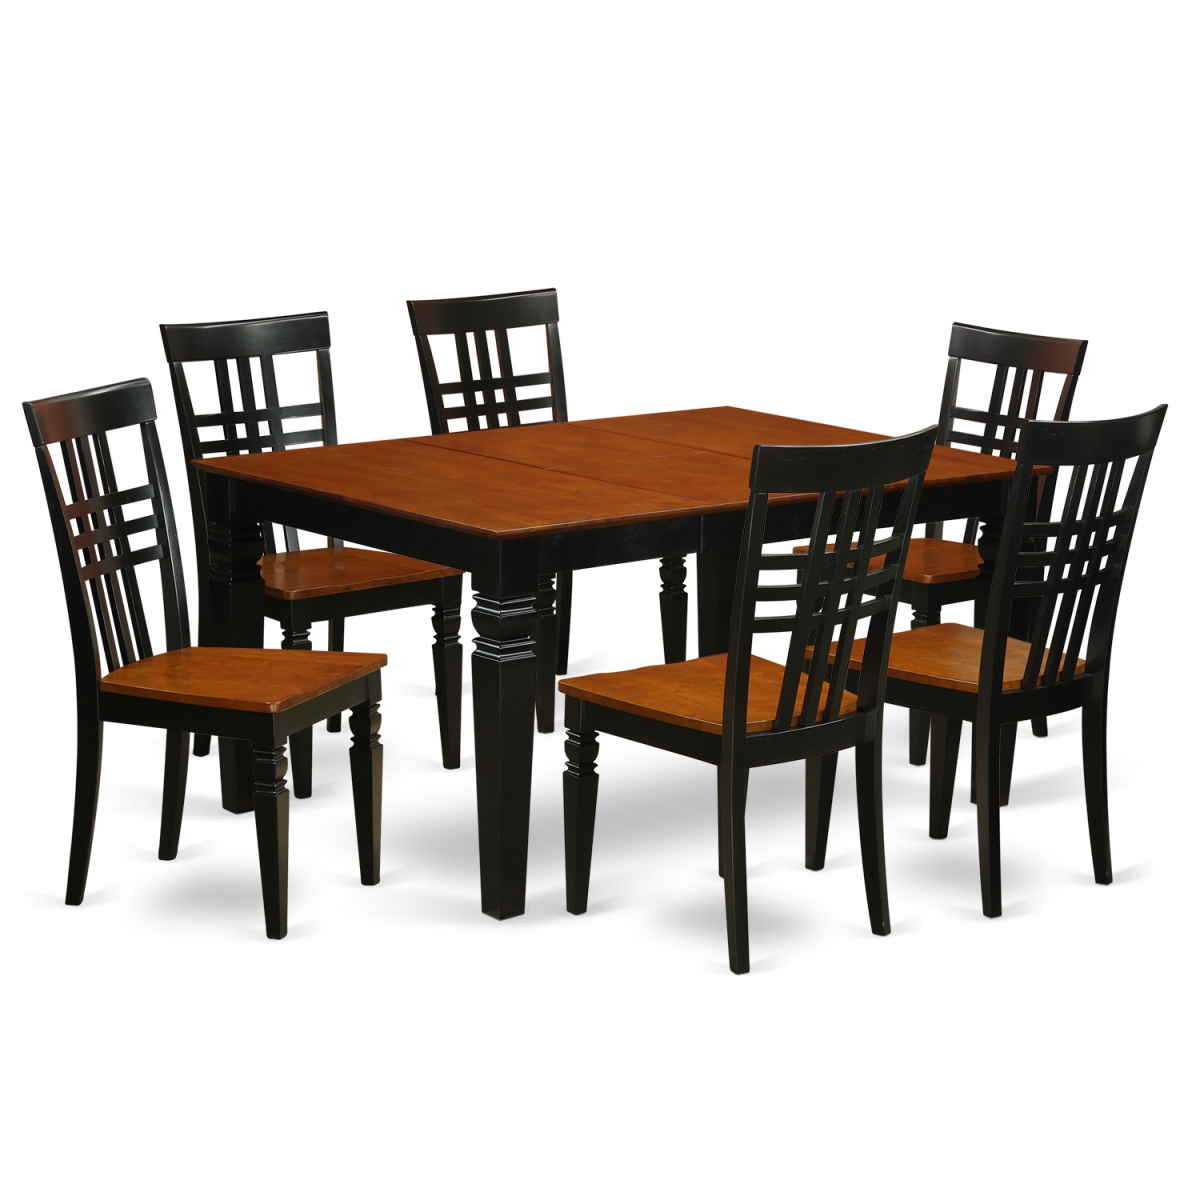 WELG7-BCH-W Dining Set with One Weston Kitchen Table & 6 Wood Chairs, Luxurious Black - 7 Piece -  East West Furniture